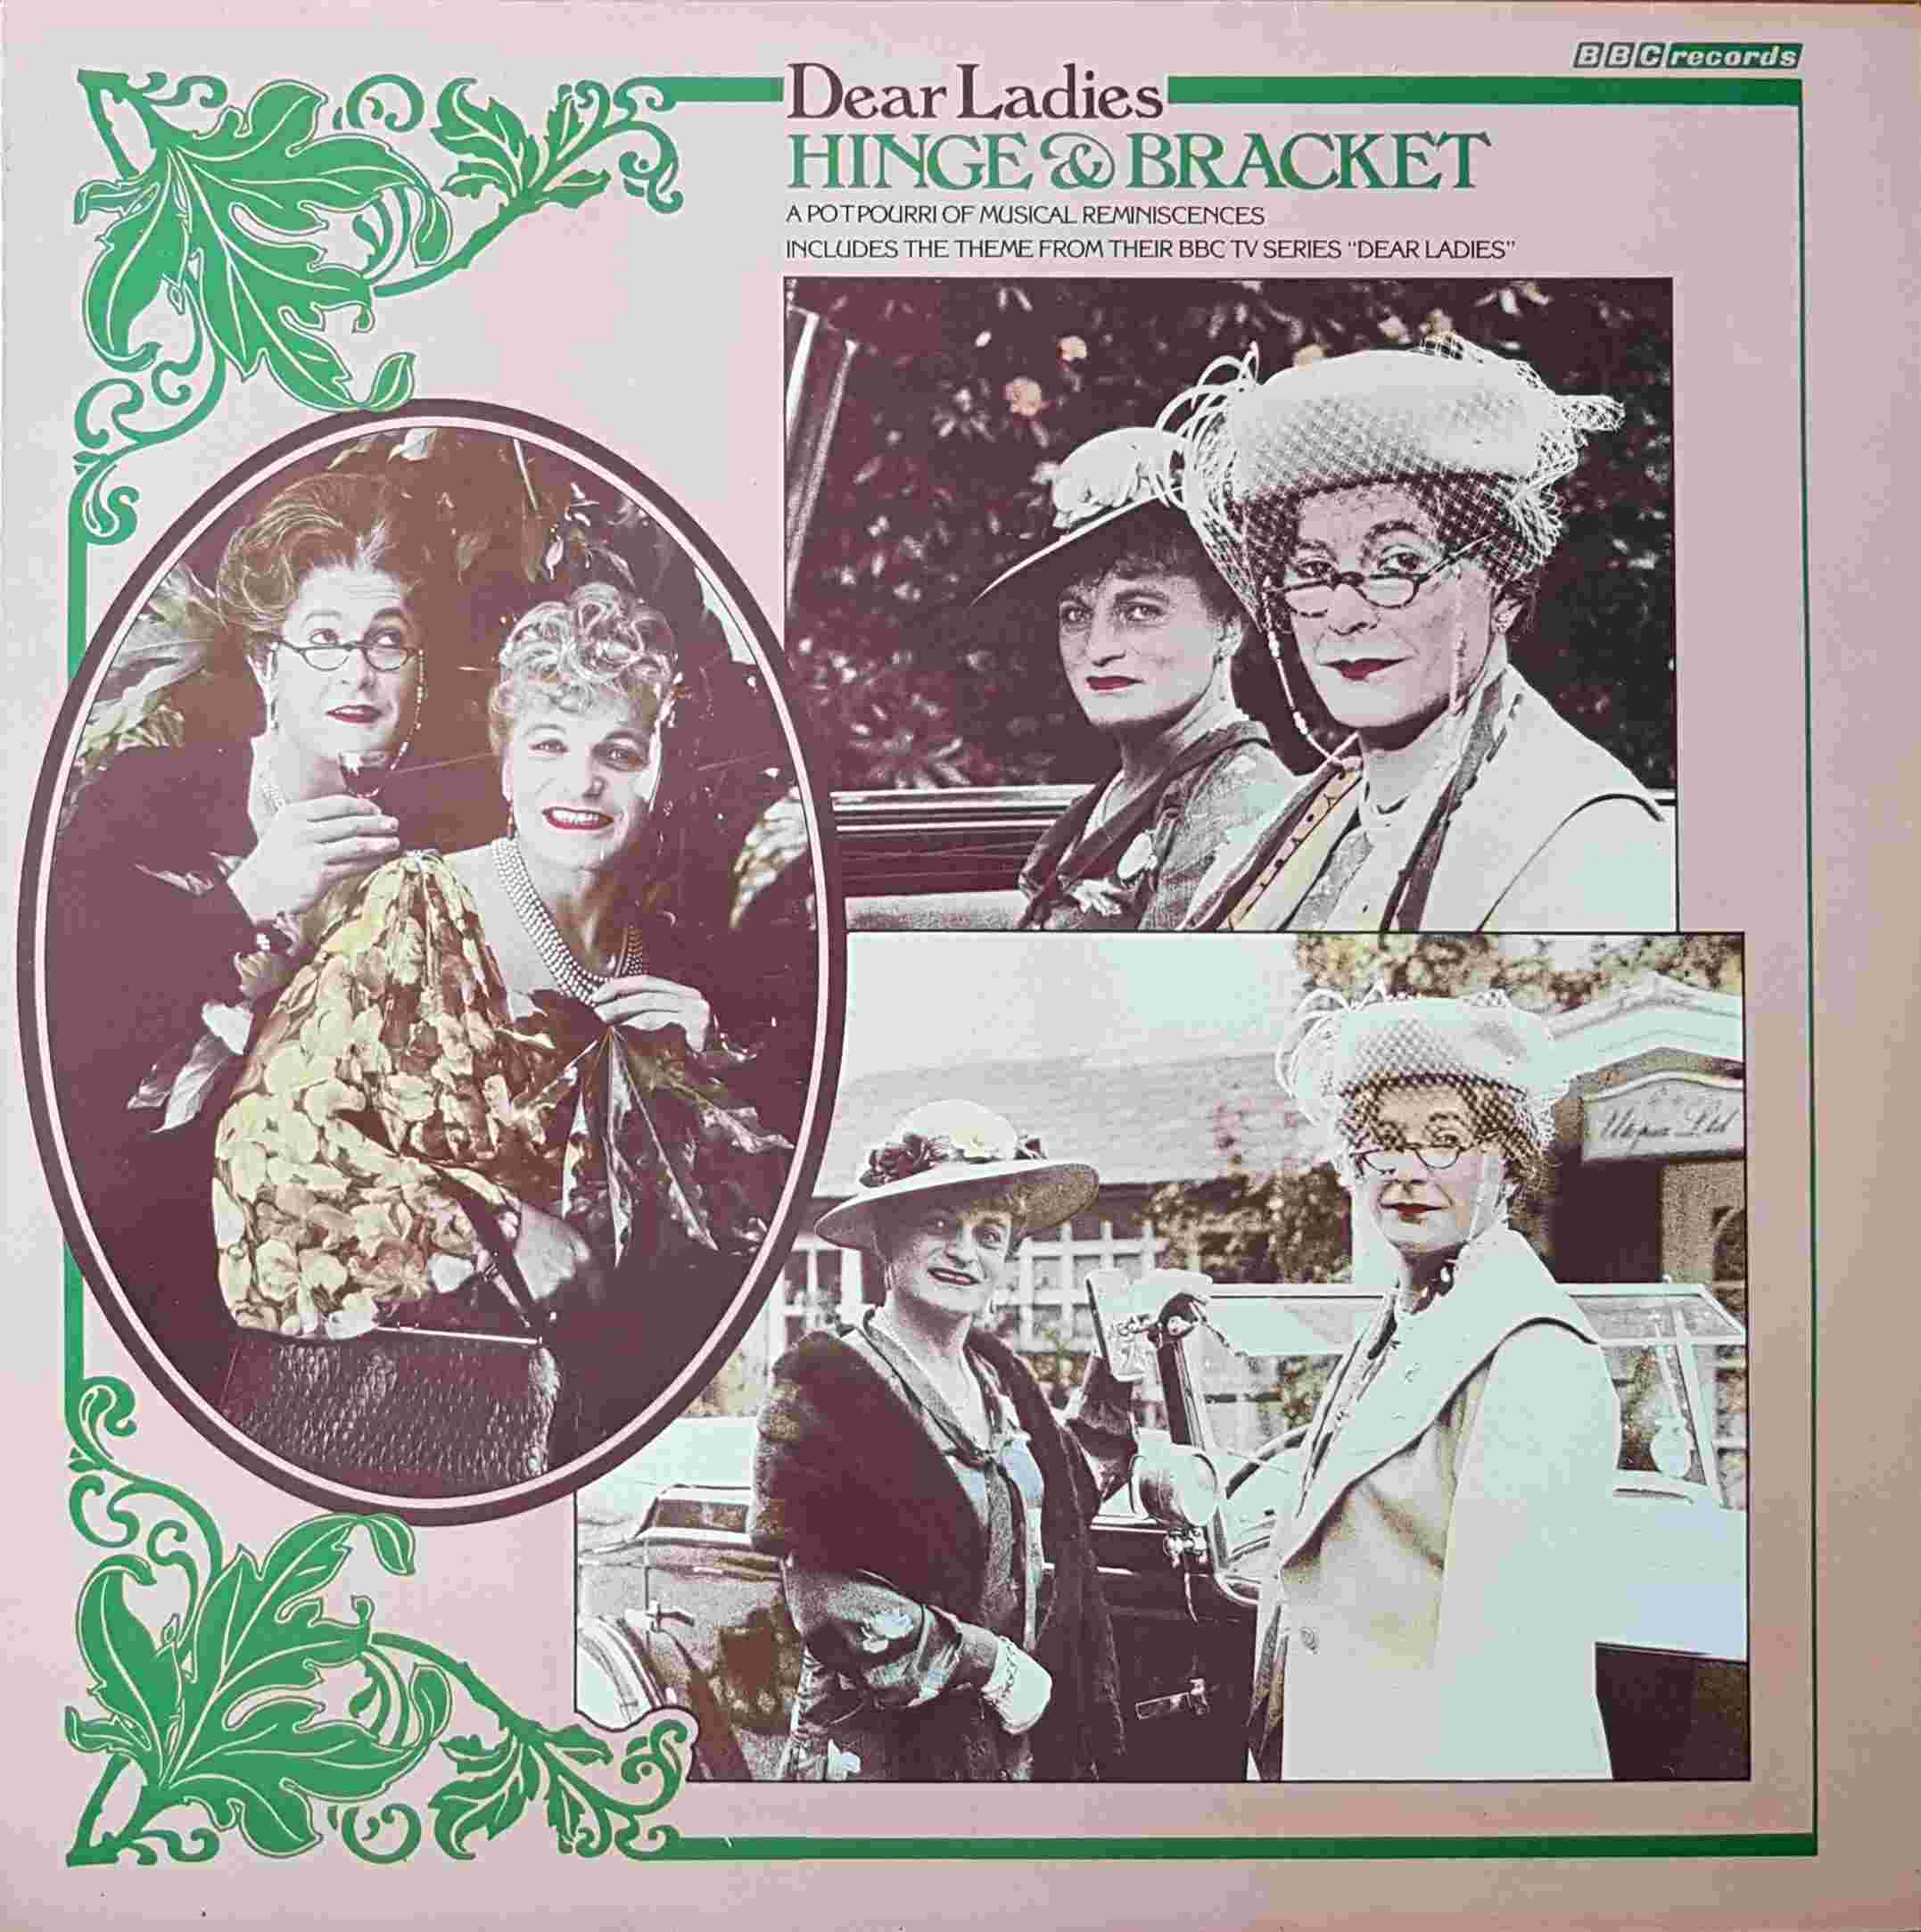 Picture of REH 450 Dear ladies - Hinge and Bracket by artist Various from the BBC albums - Records and Tapes library